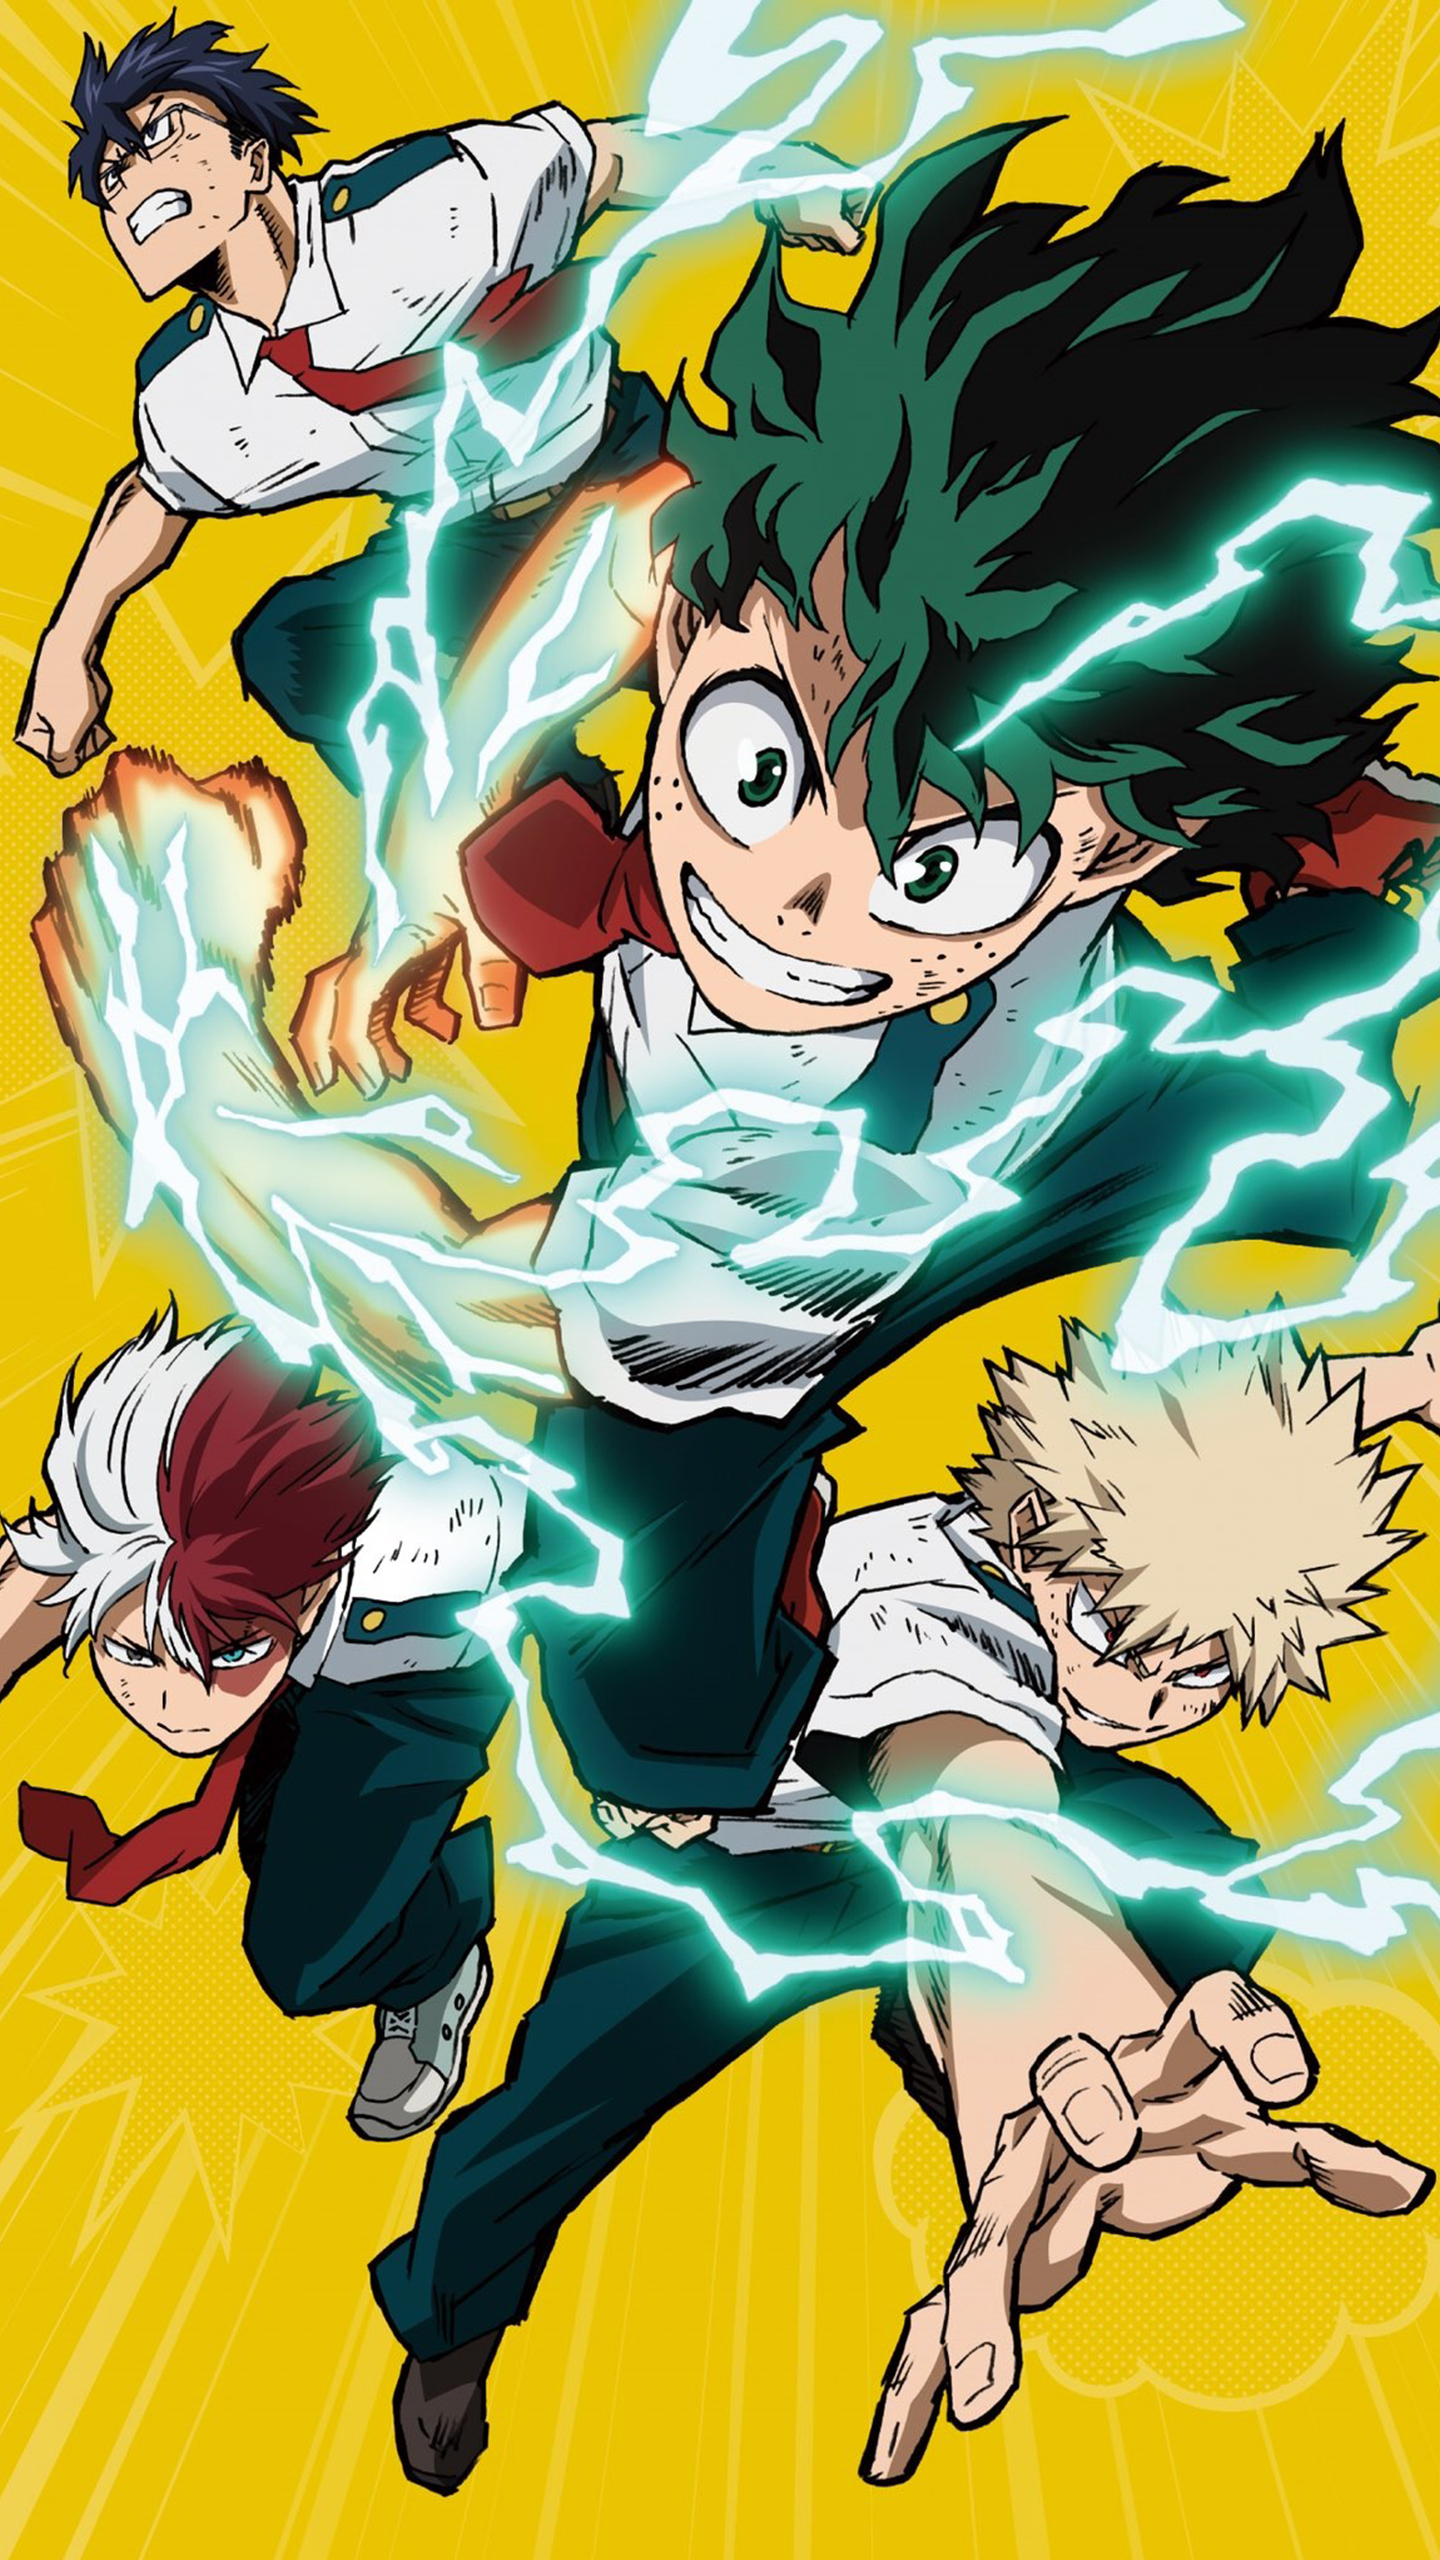 Download All In This Section Hero Academia Season 3